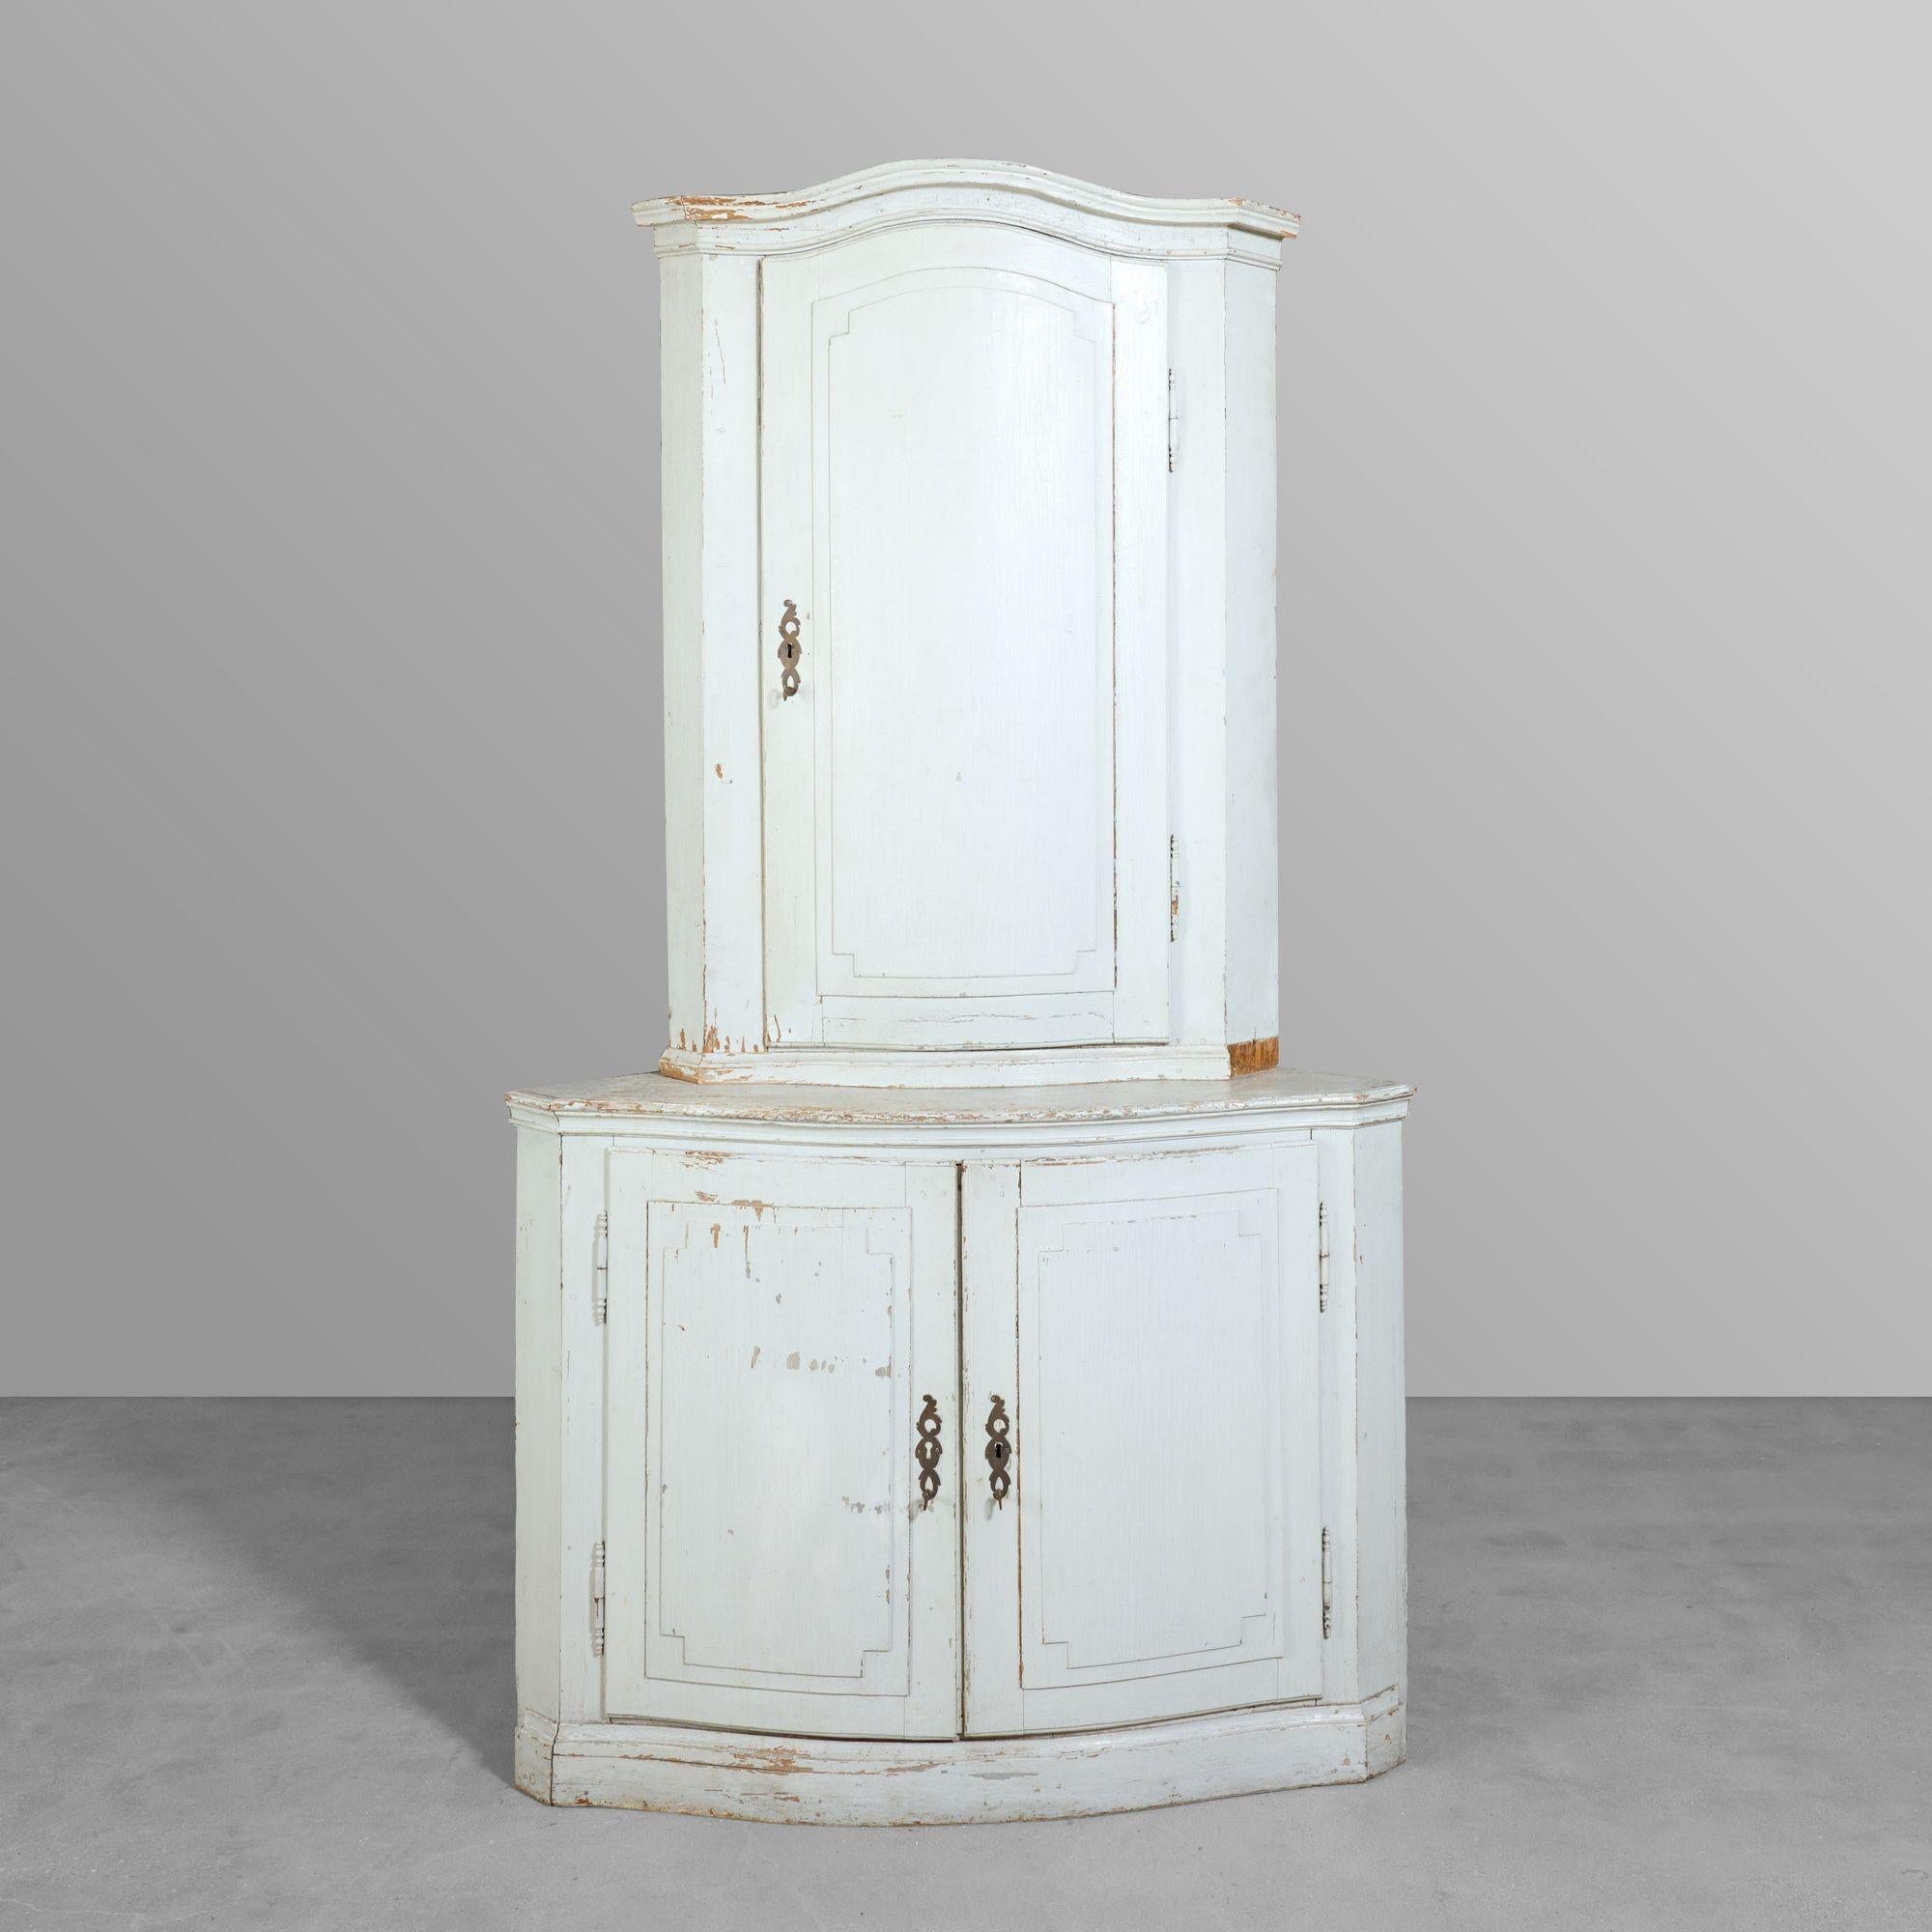 Two tier corner cabinet with great paint and cool inner shelves. Great hardware as well.